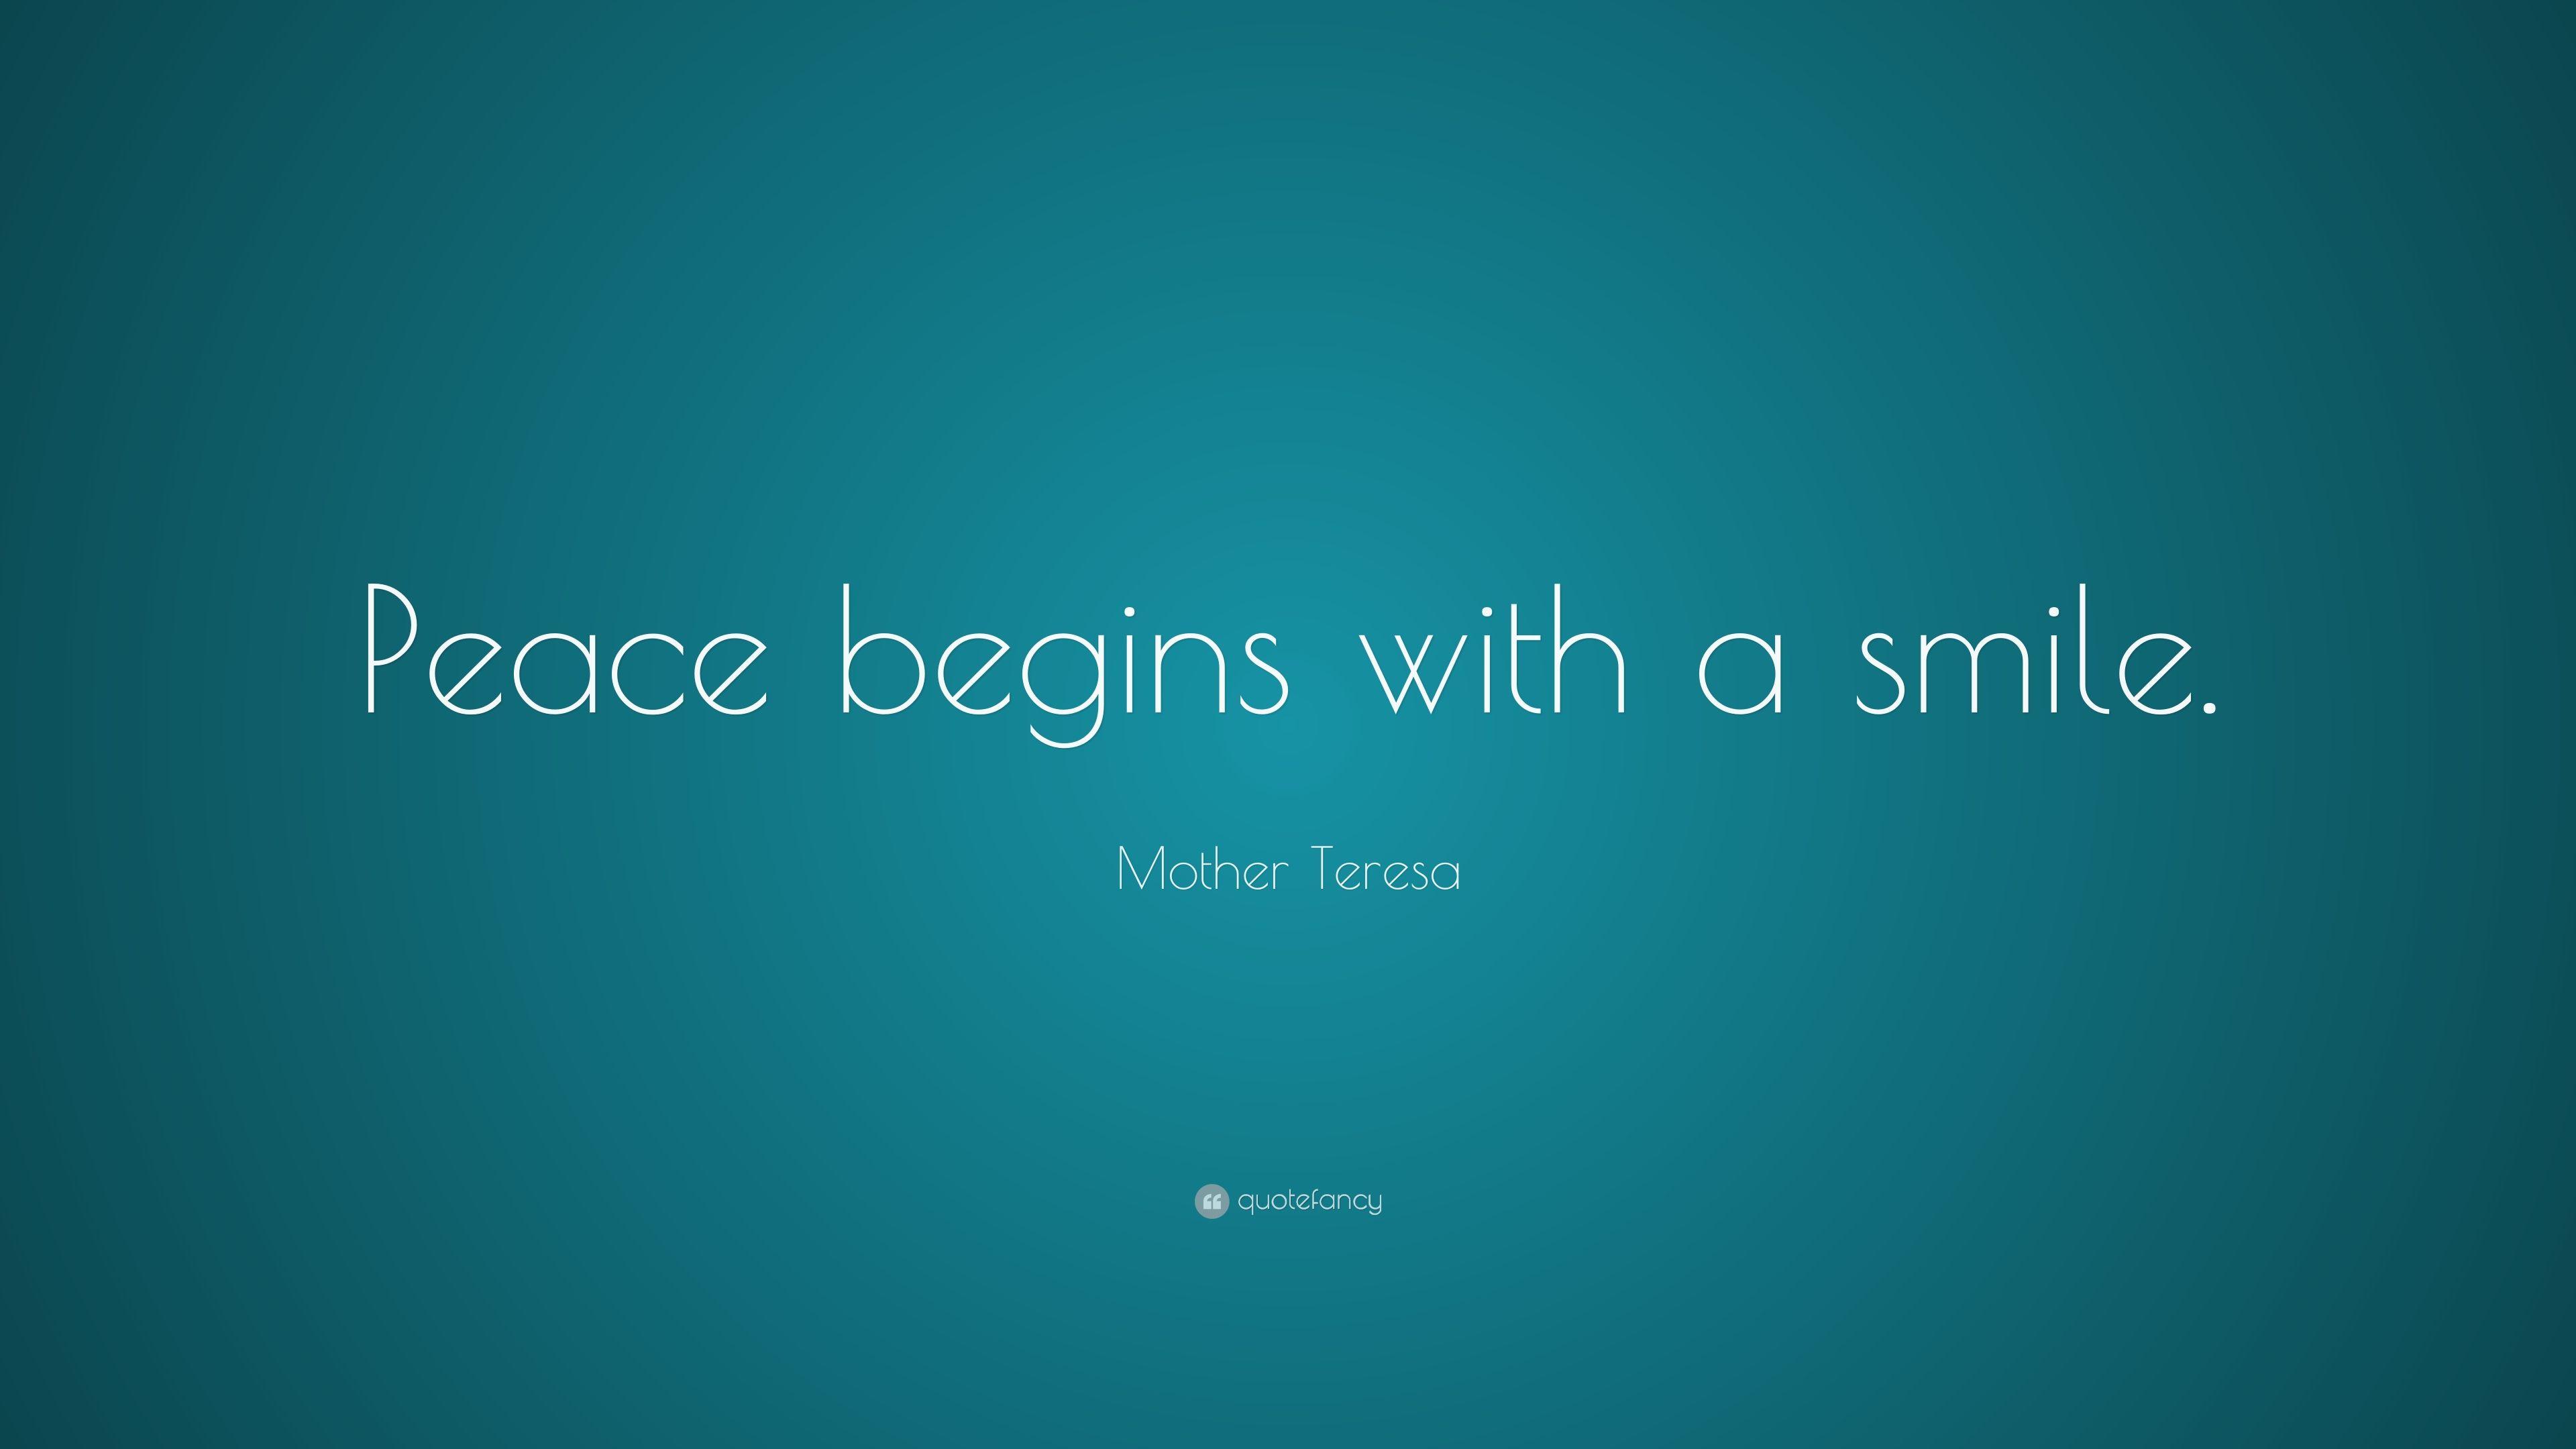 Mother Teresa Quote: “Peace begins with a smile.” (25 wallpaper)